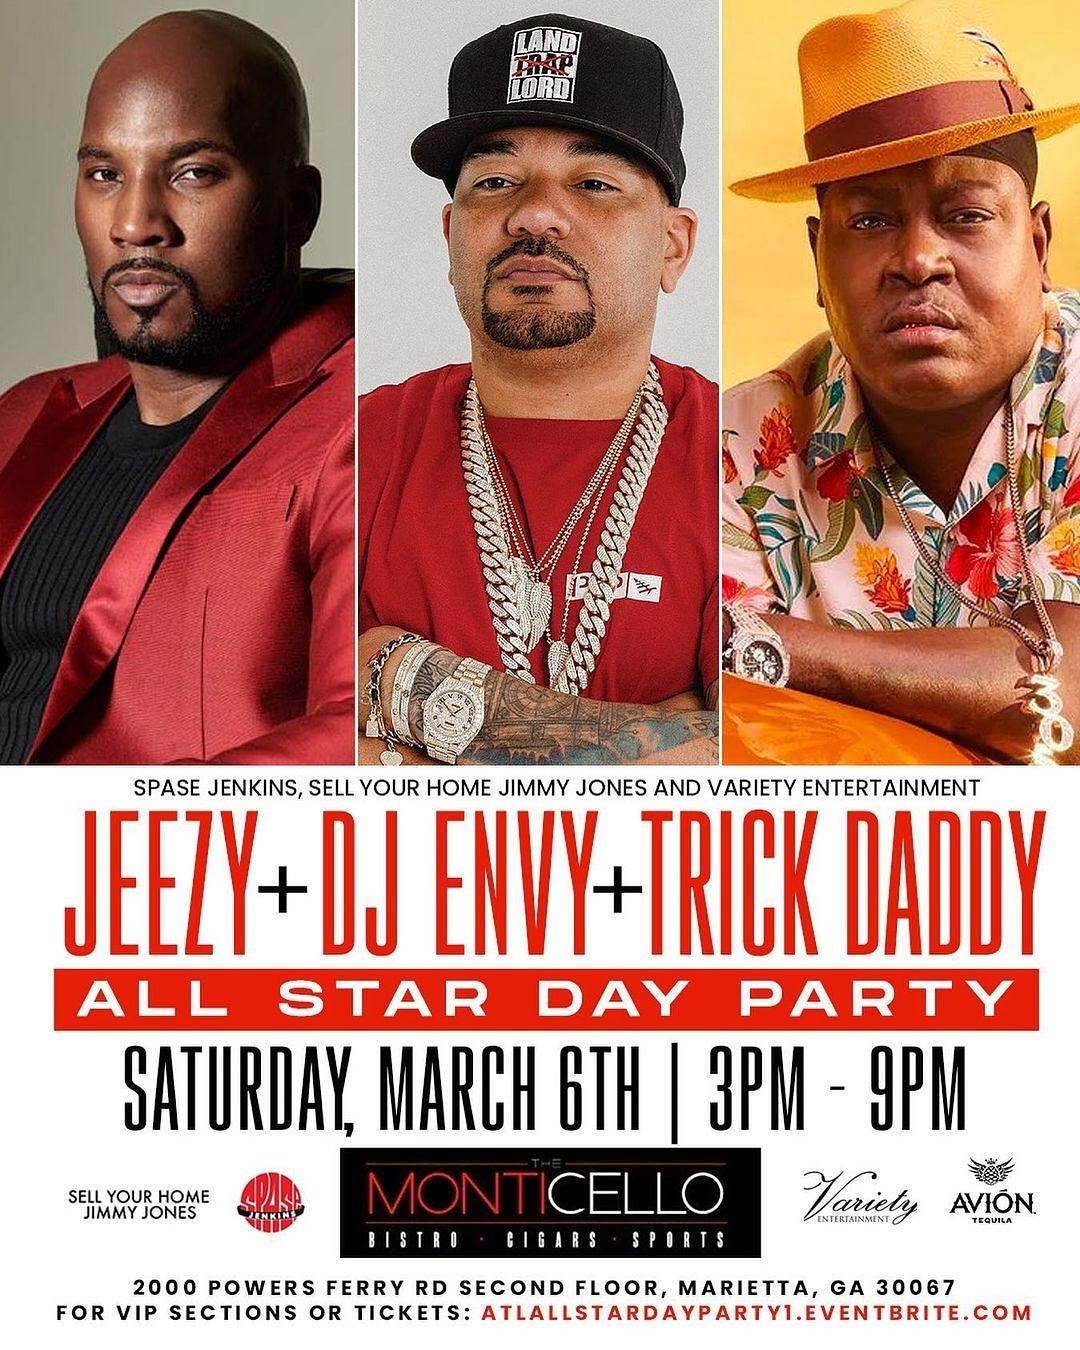 ALL-STAR LINK 4 JEEZY-DJ ENVY & TRICK DADDY-OPEN TO SEE LINK FOR TICKETS